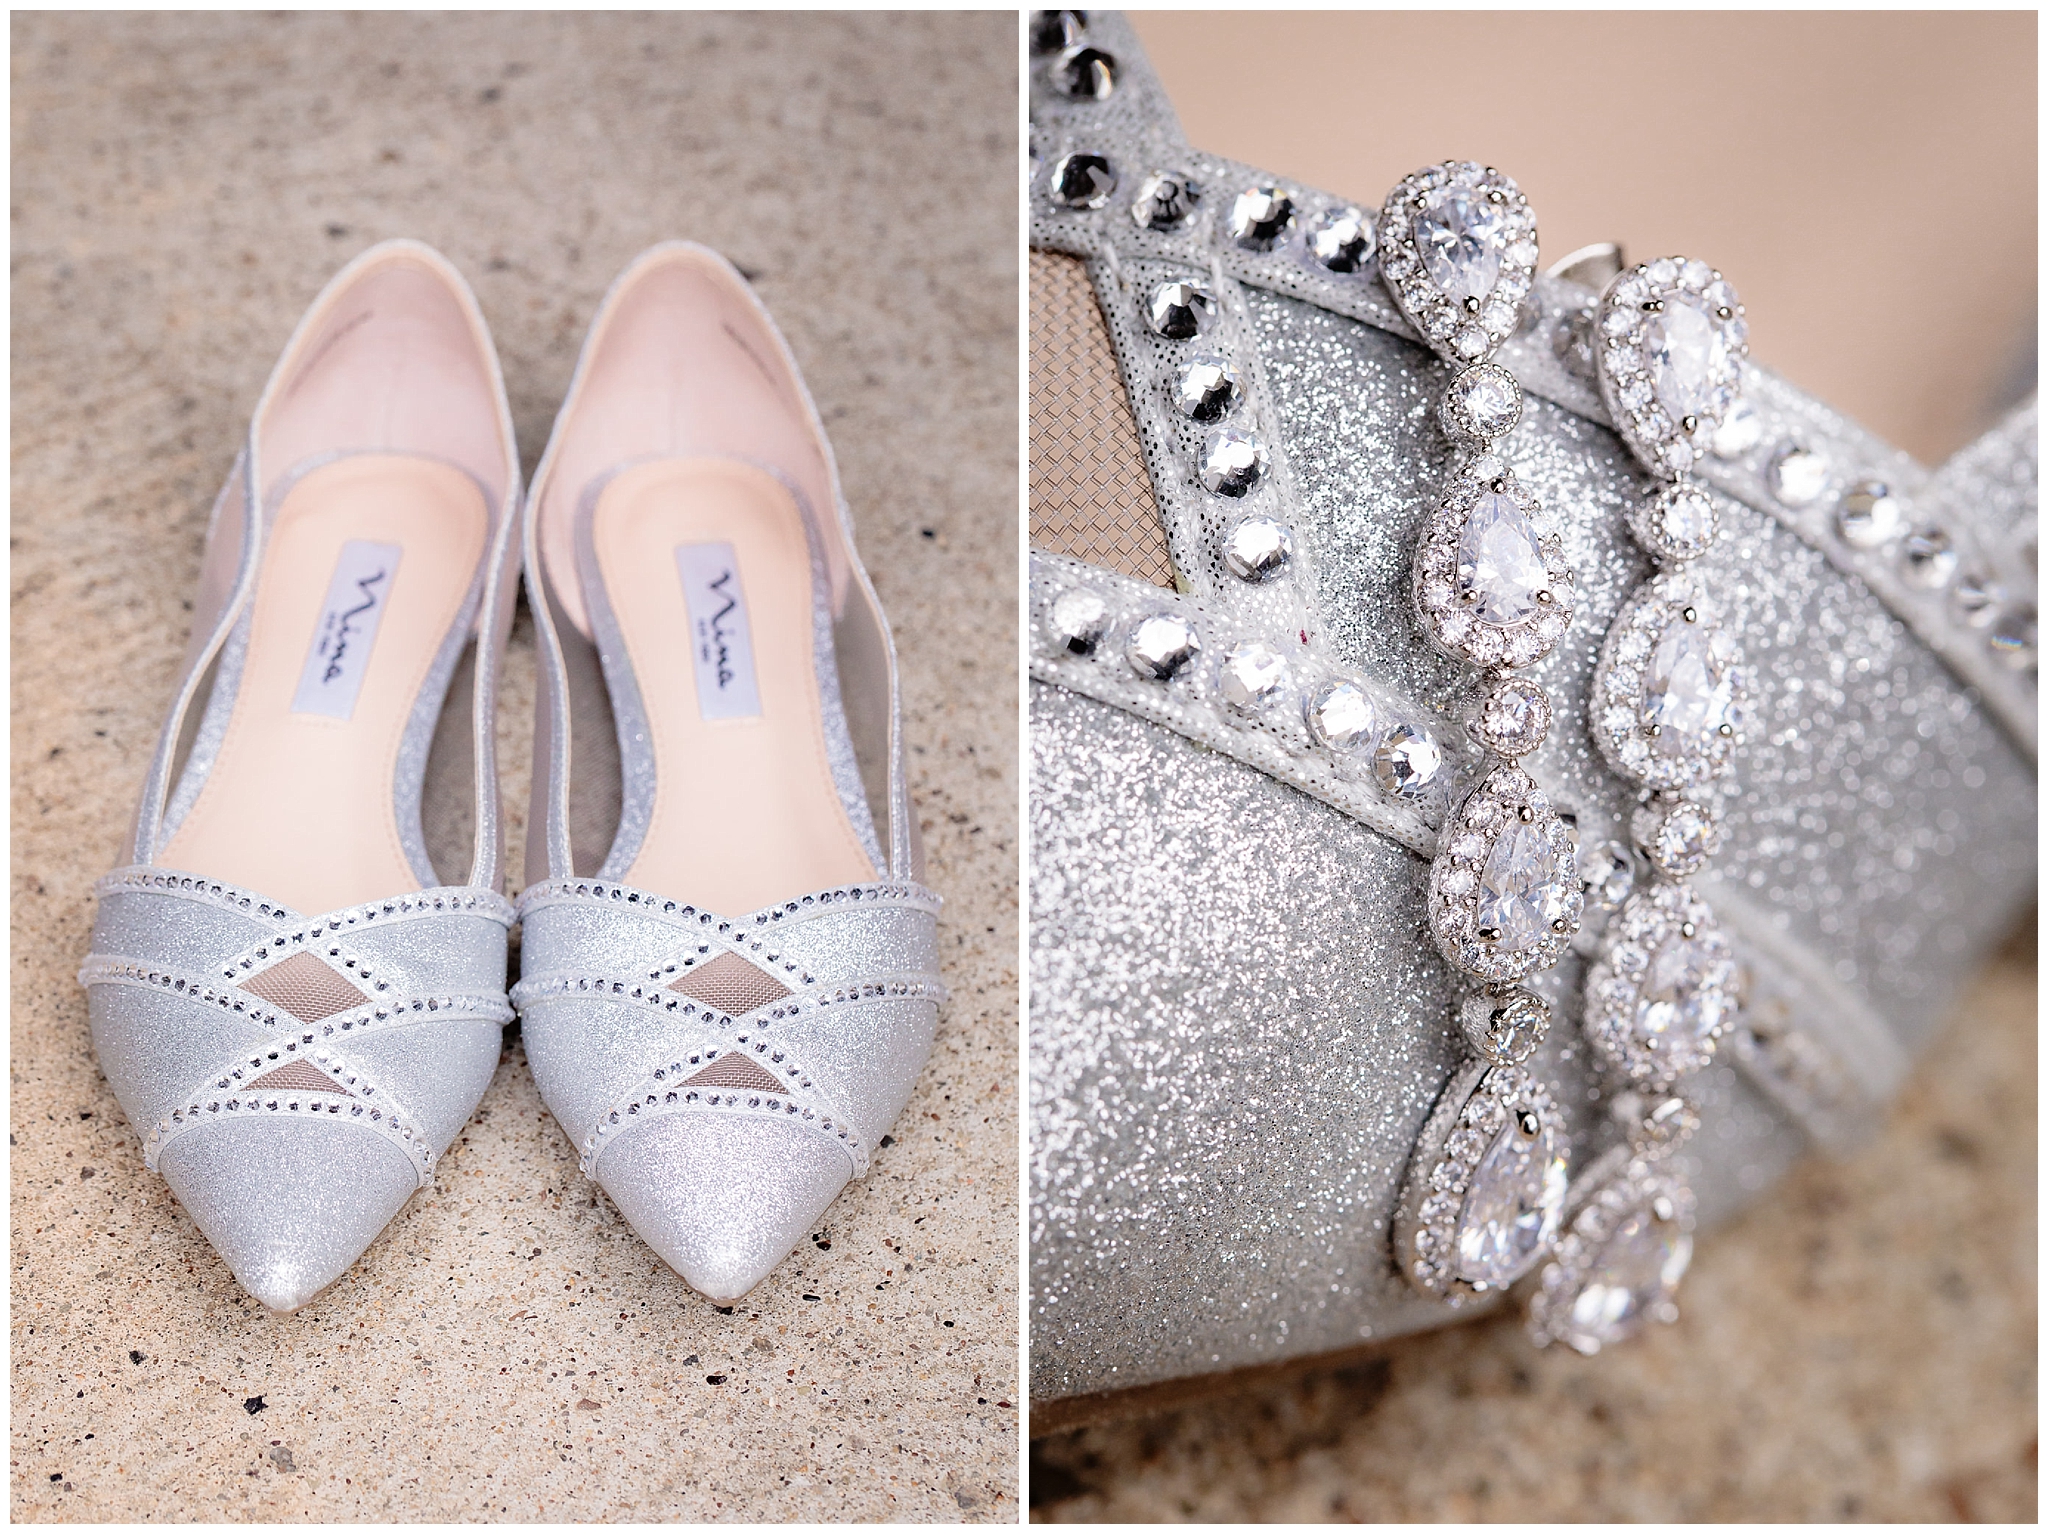 Bride's silver shoes and matching diamond earrings for a Mt. Lebanon United Methodist Church wedding